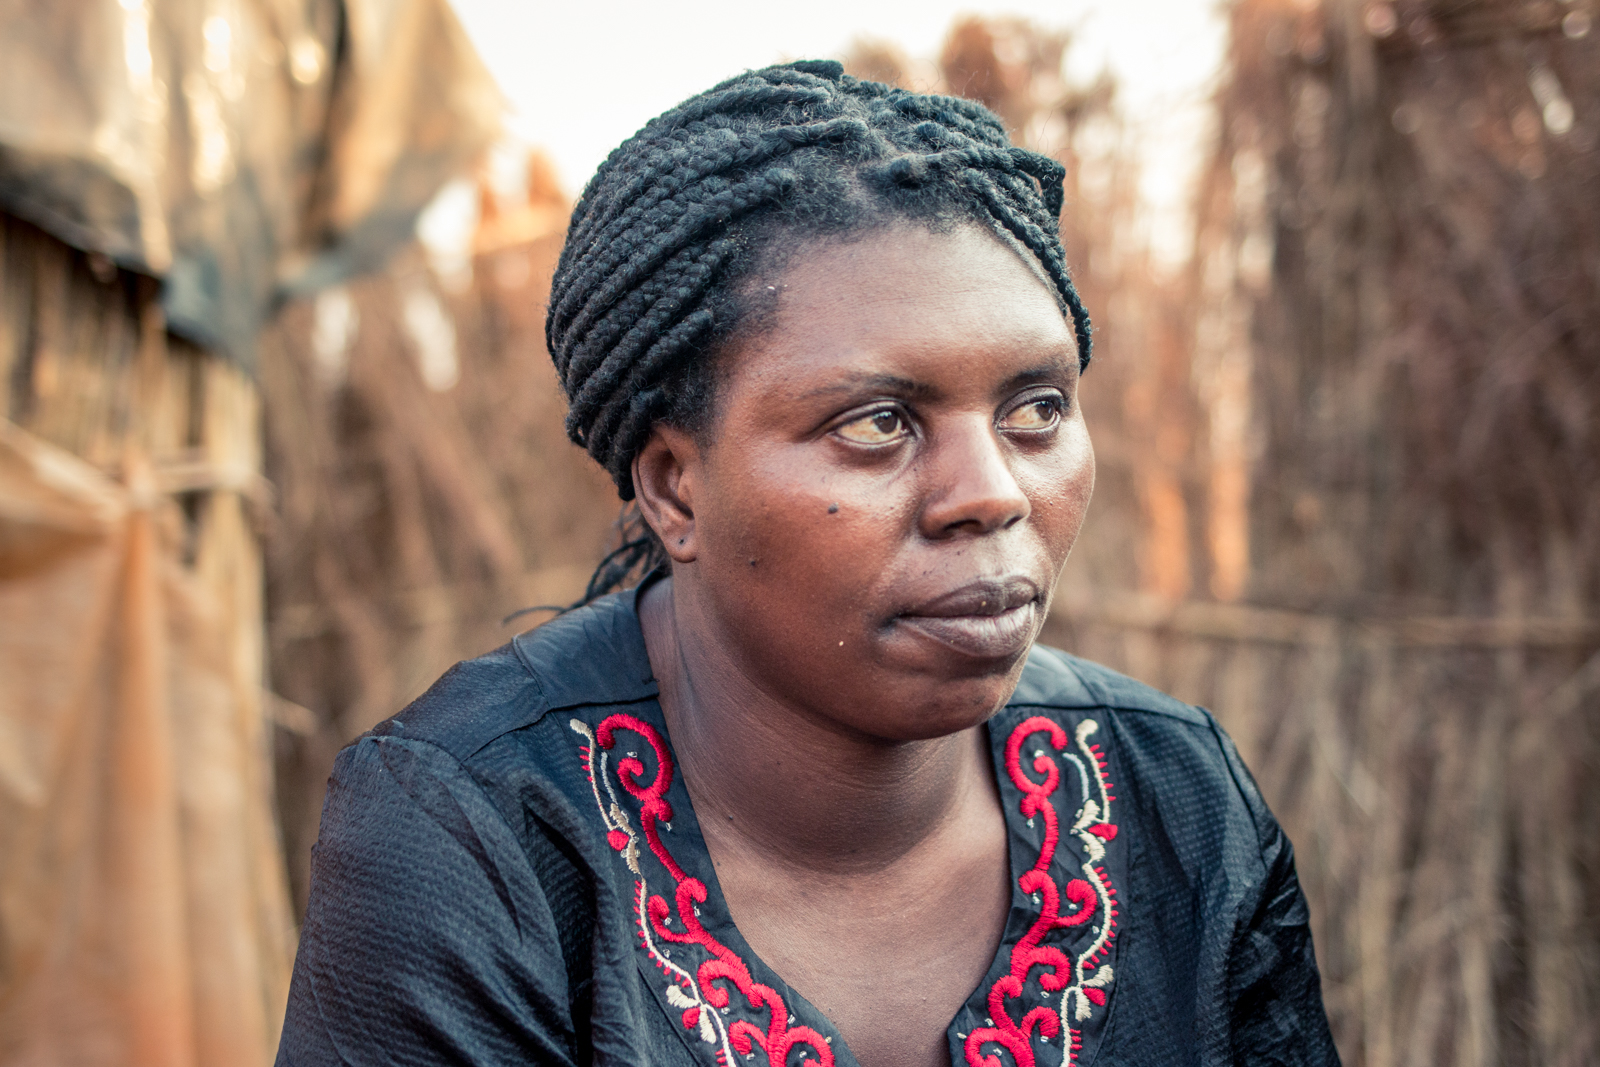  ZIMBABWE: [Home Visit] Patricia is a 37 year old single mother. She has 2 children a 15 year old daughter who has to live with and be taken care of by her brother in town, and a 21 year old son with cerebral palsy.. 